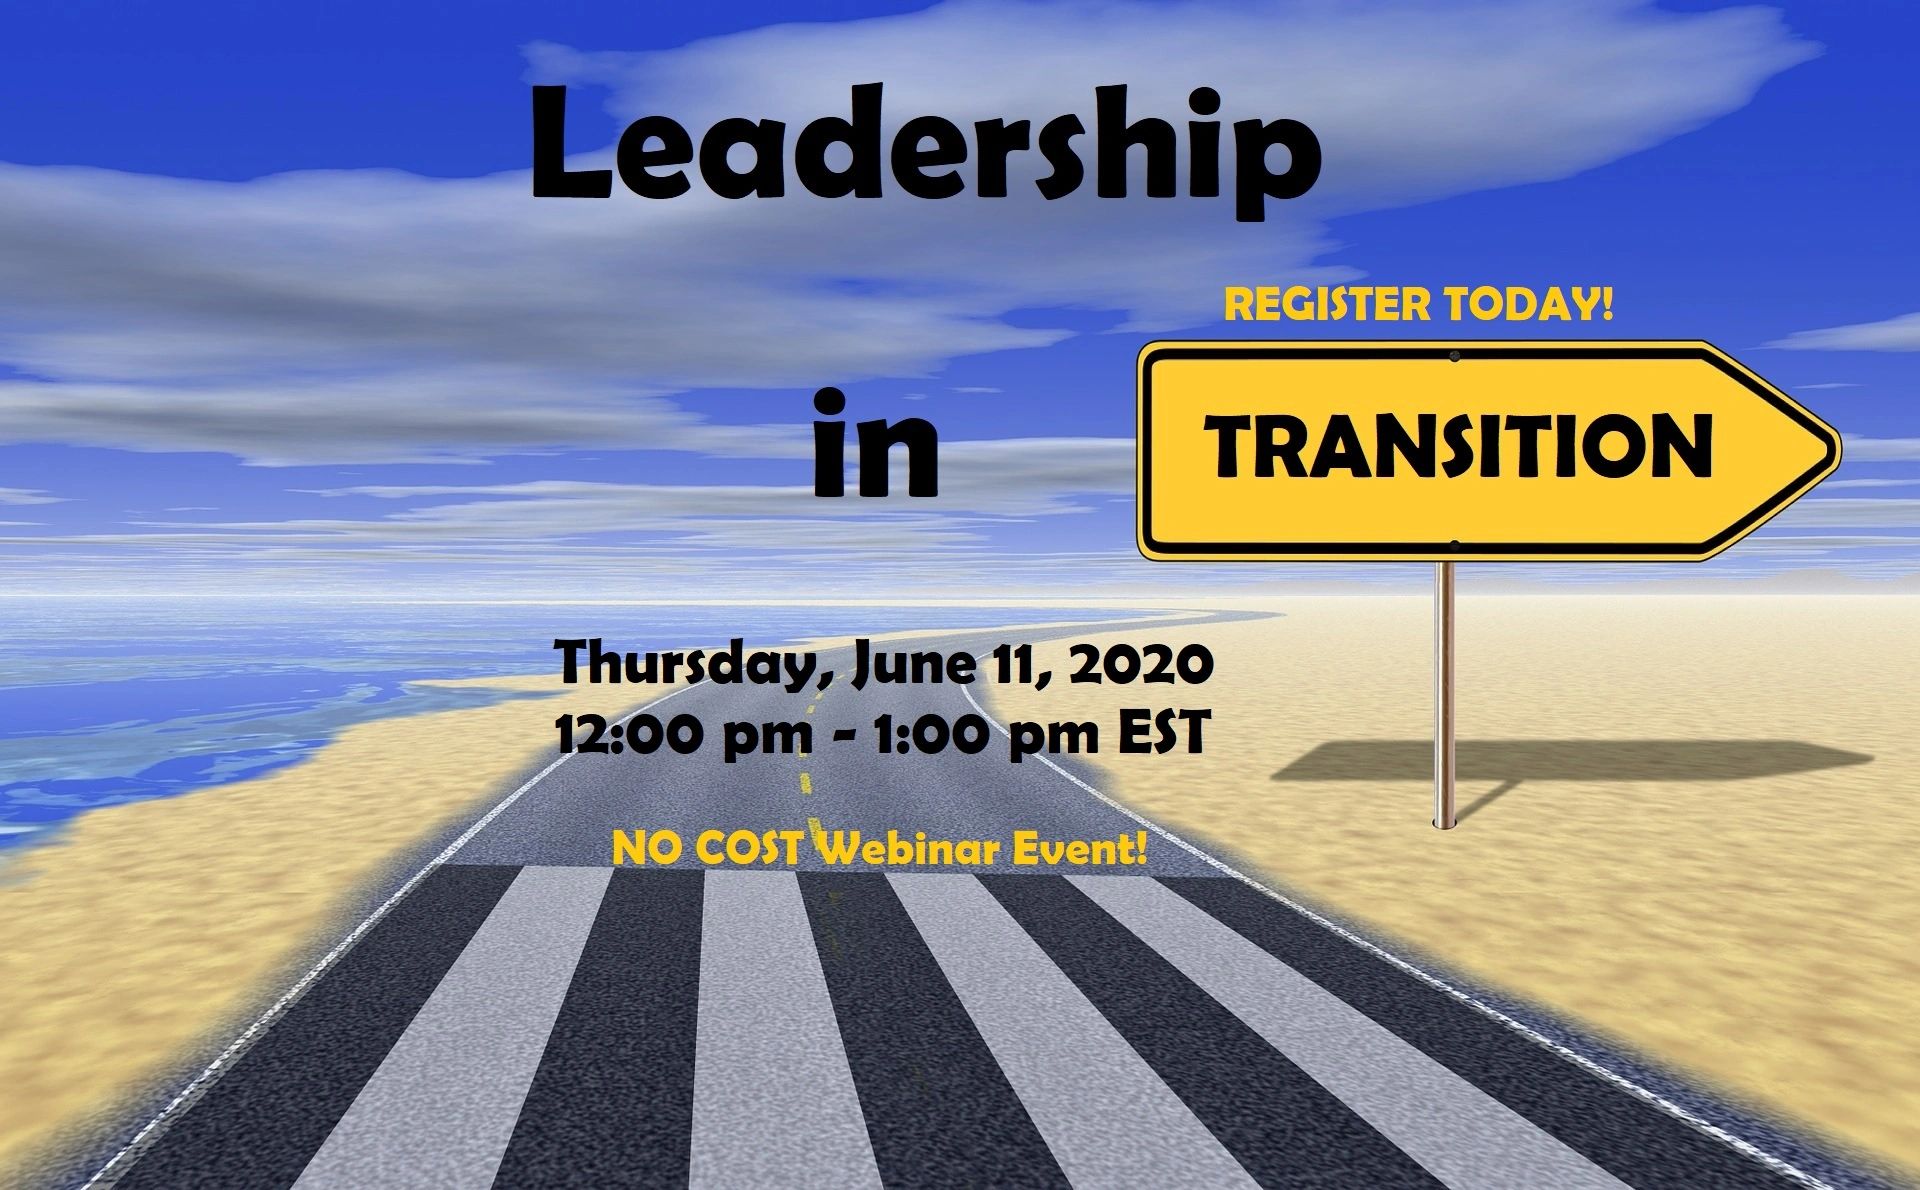 Leadership in Transition is a free webinar that outlines five leadership lessons for leaders today.